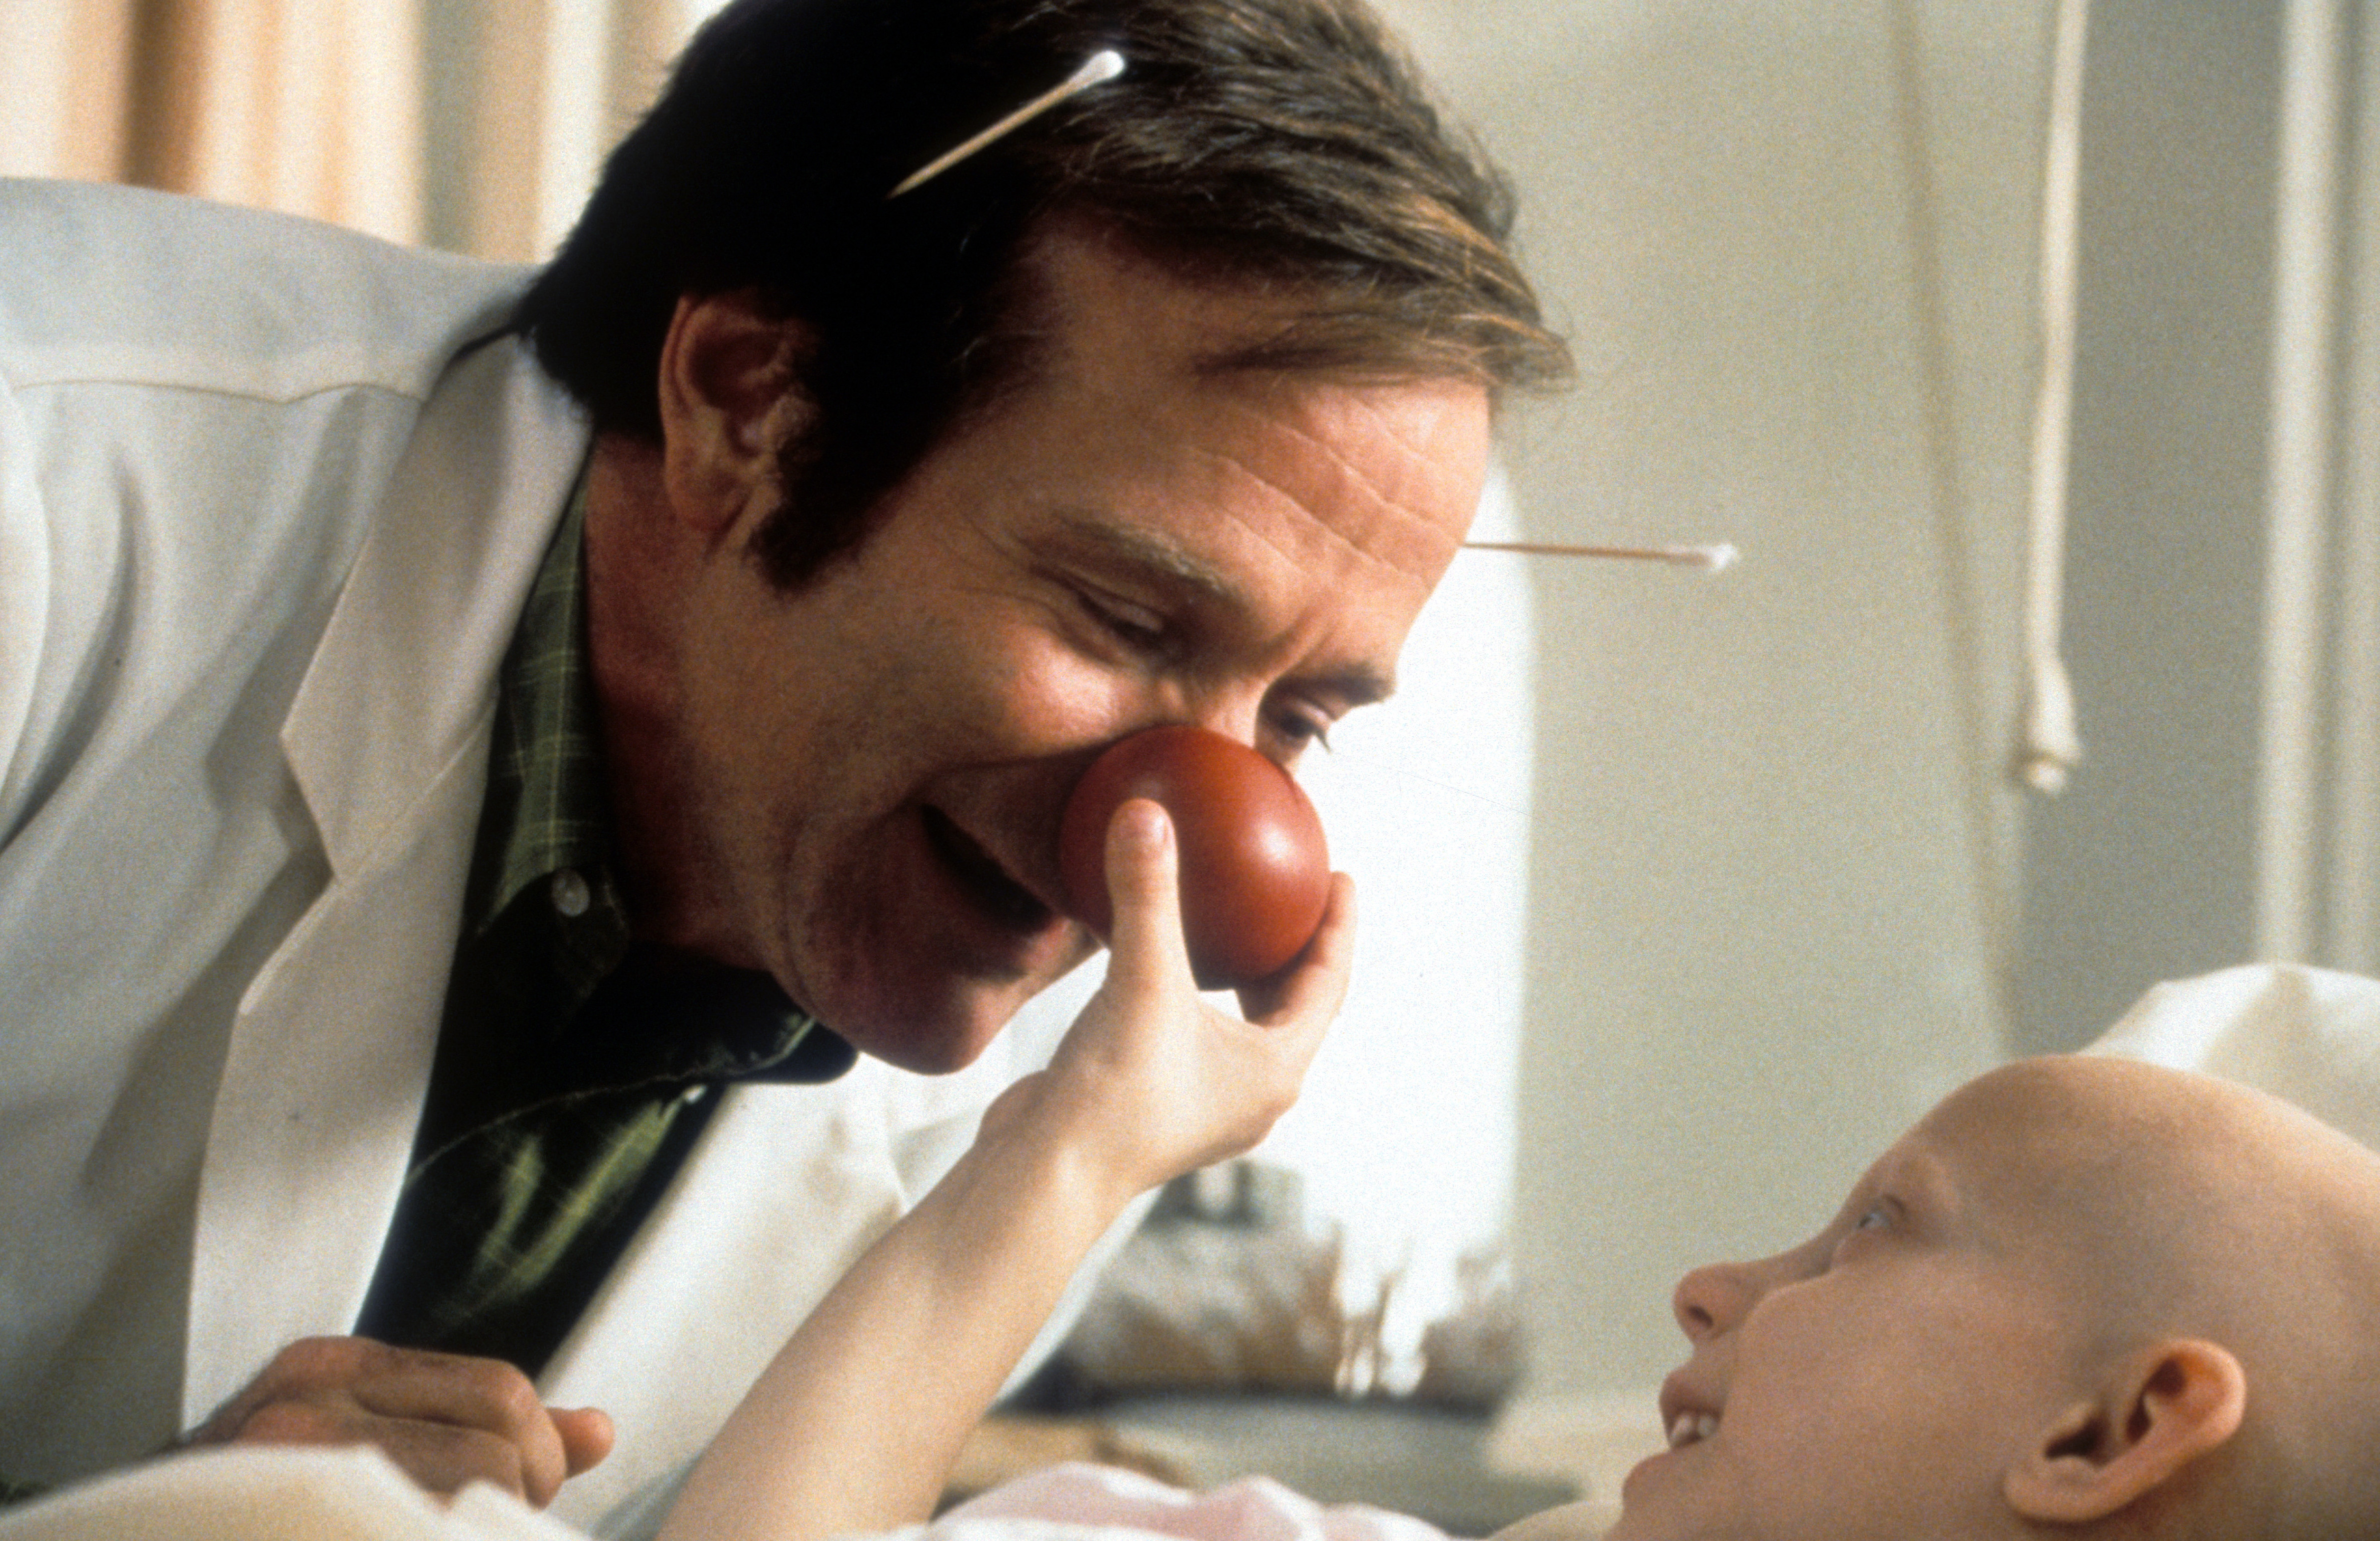 Robin Williams in a scene from the film 'Patch Adams', 1998. | Source: Getty Images